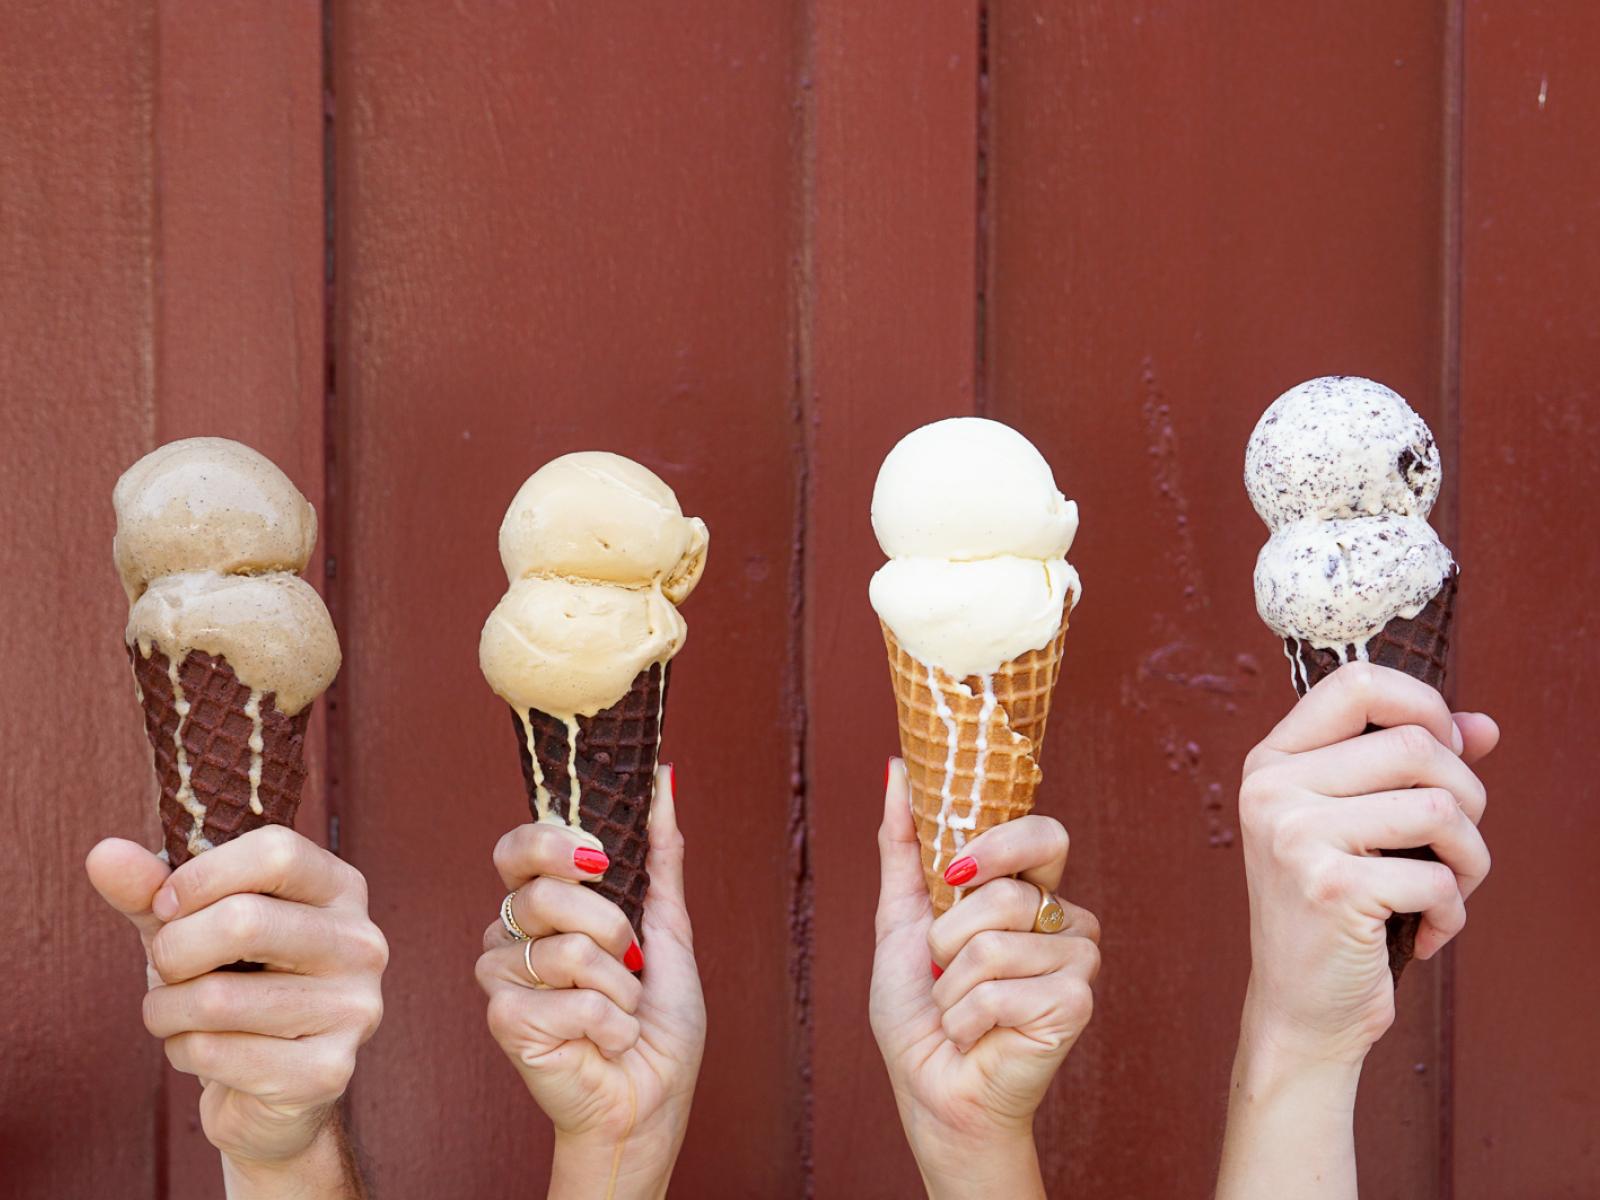 Hands holding a variety of ice cream cones from Sweet Rose Creamery